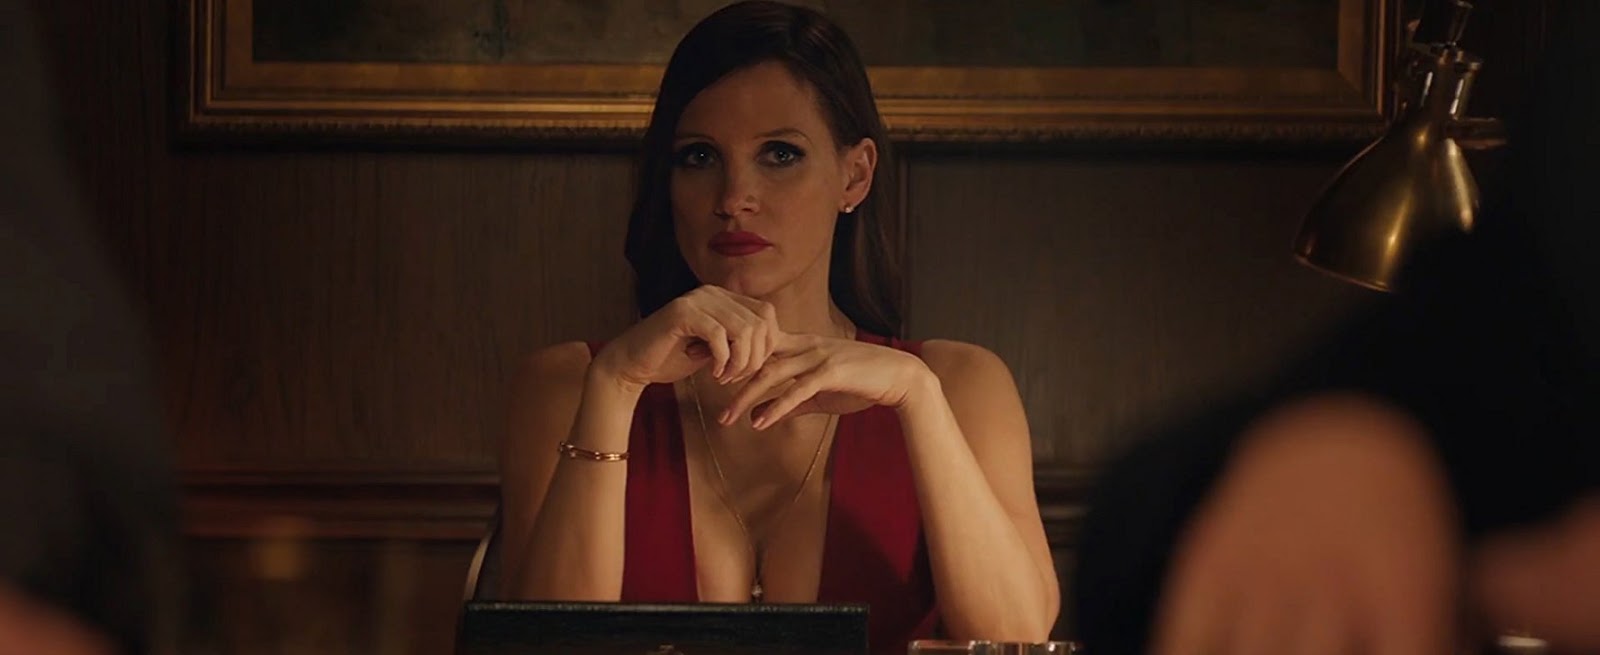 molly's game 2